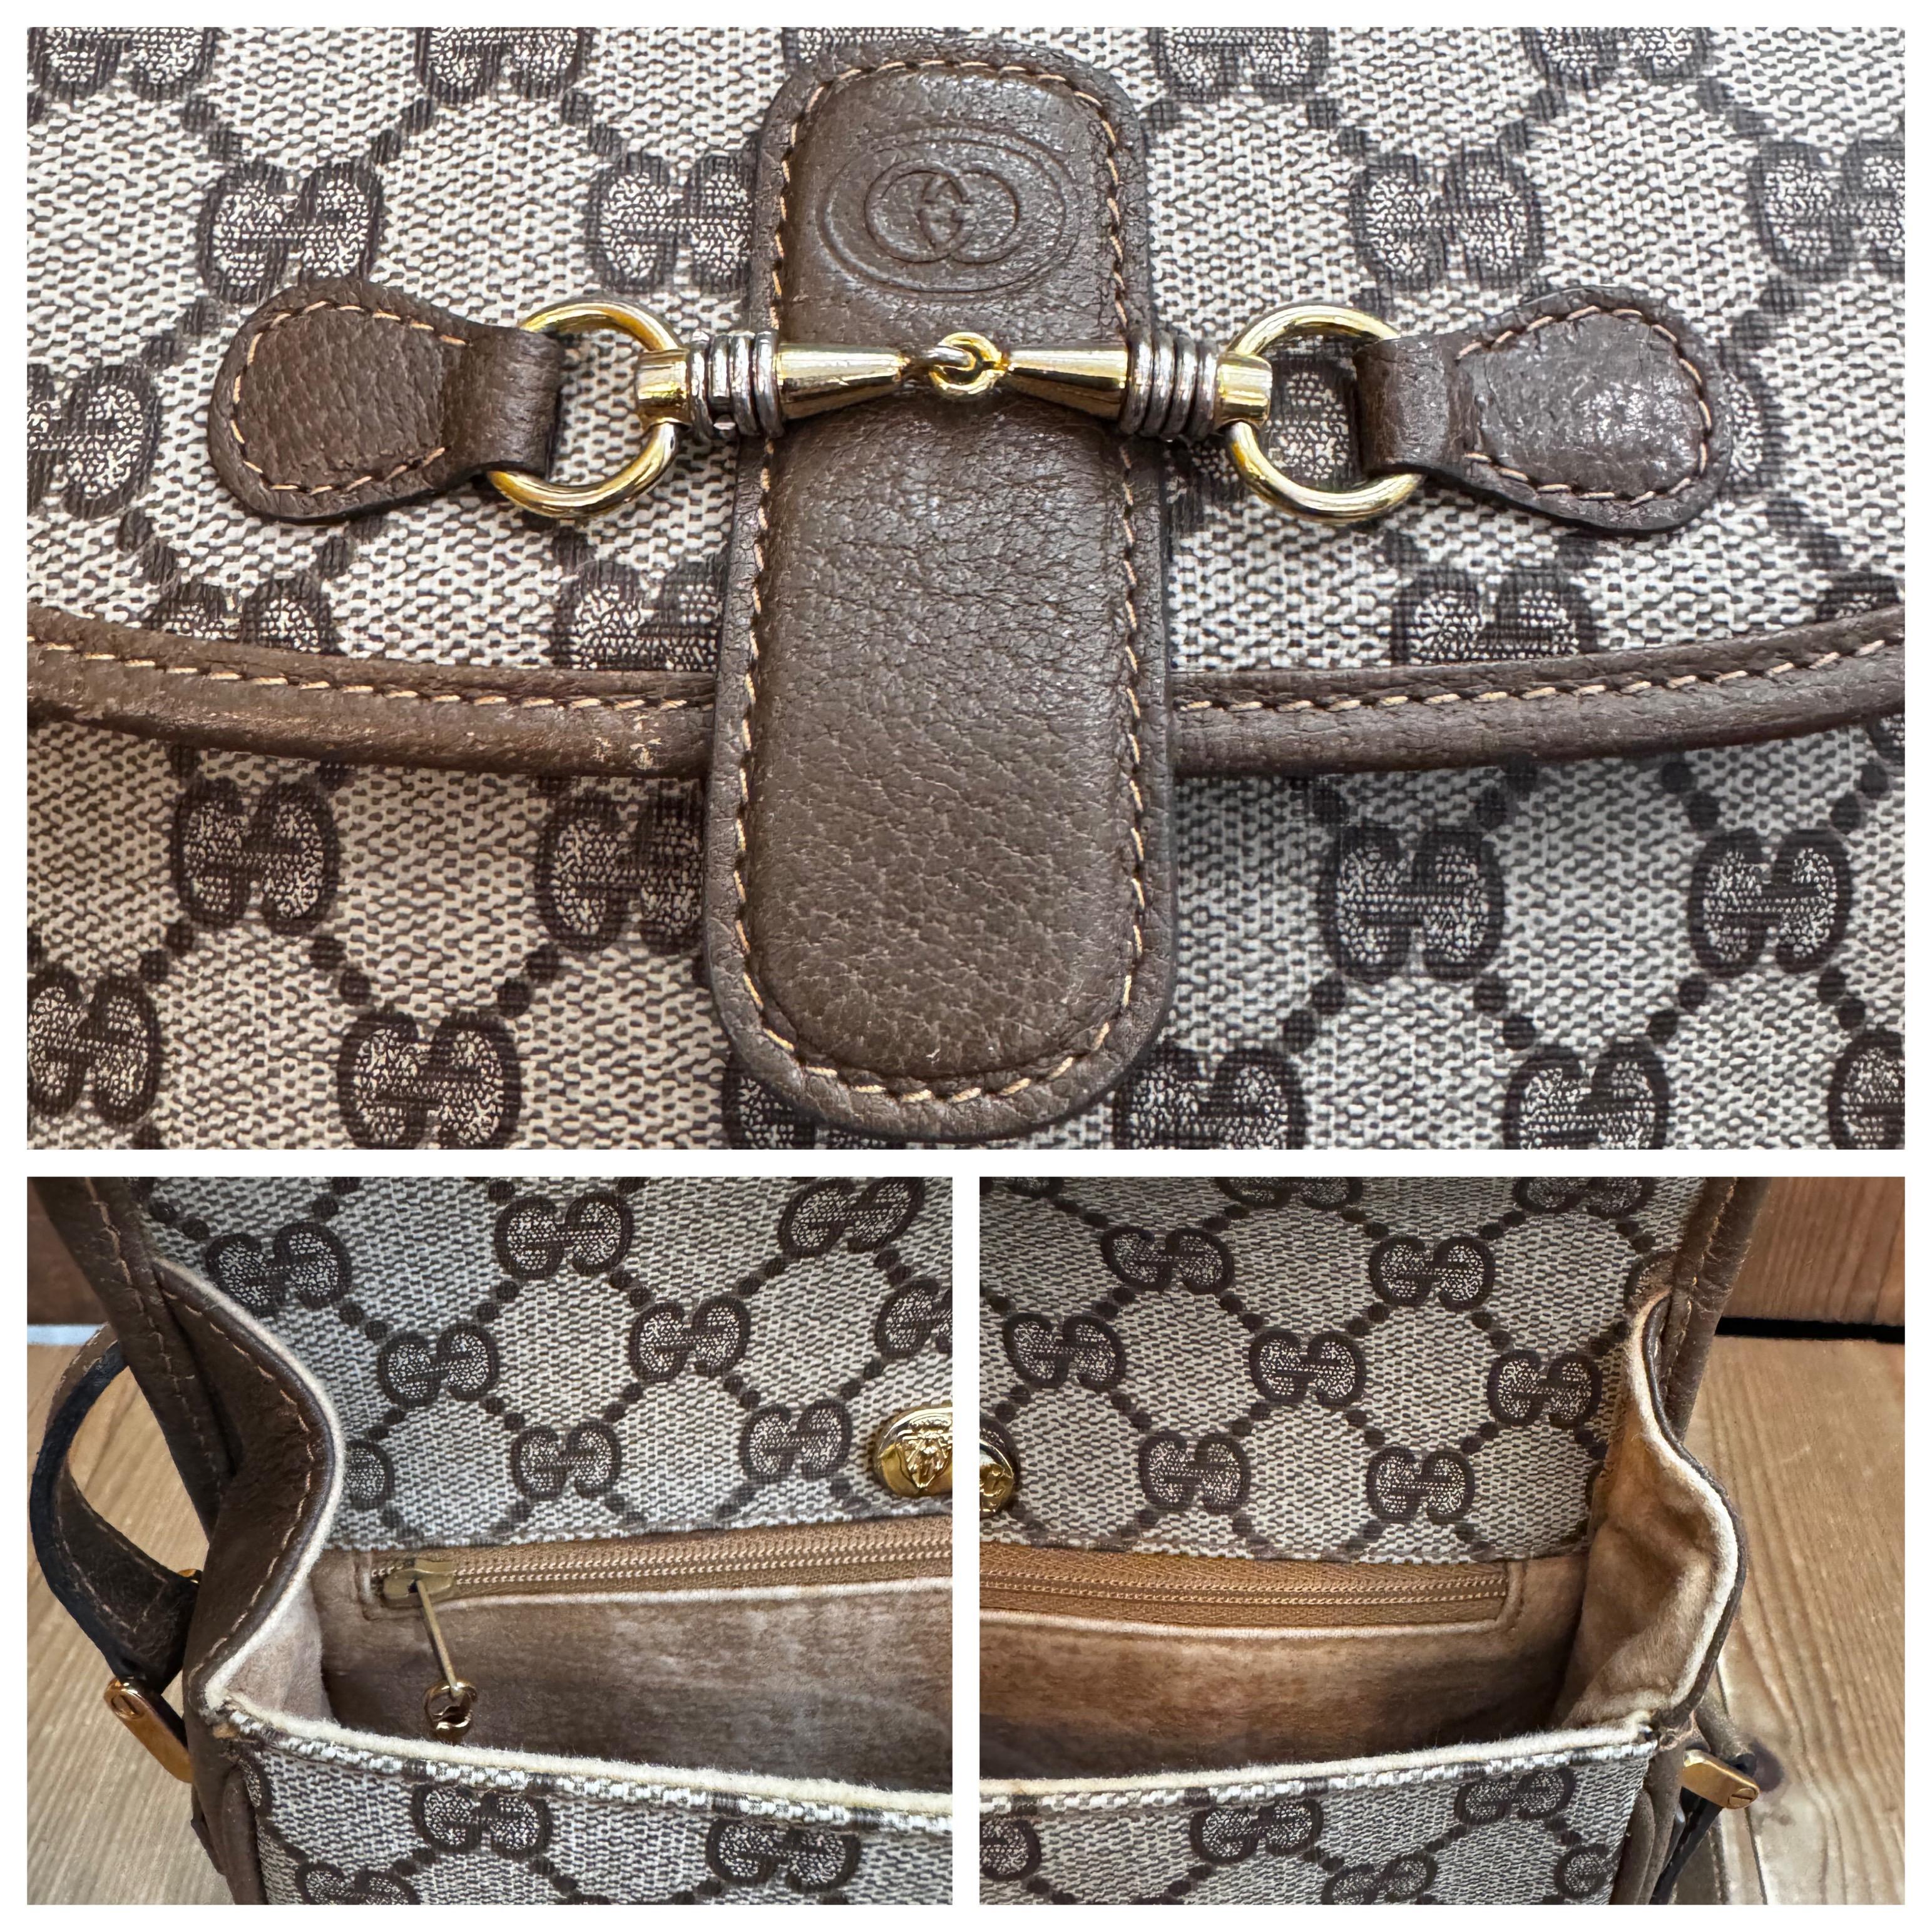 1980s Vintage GUCCI Monogram Canvas Crossbody Bag Brown Small For Sale 1